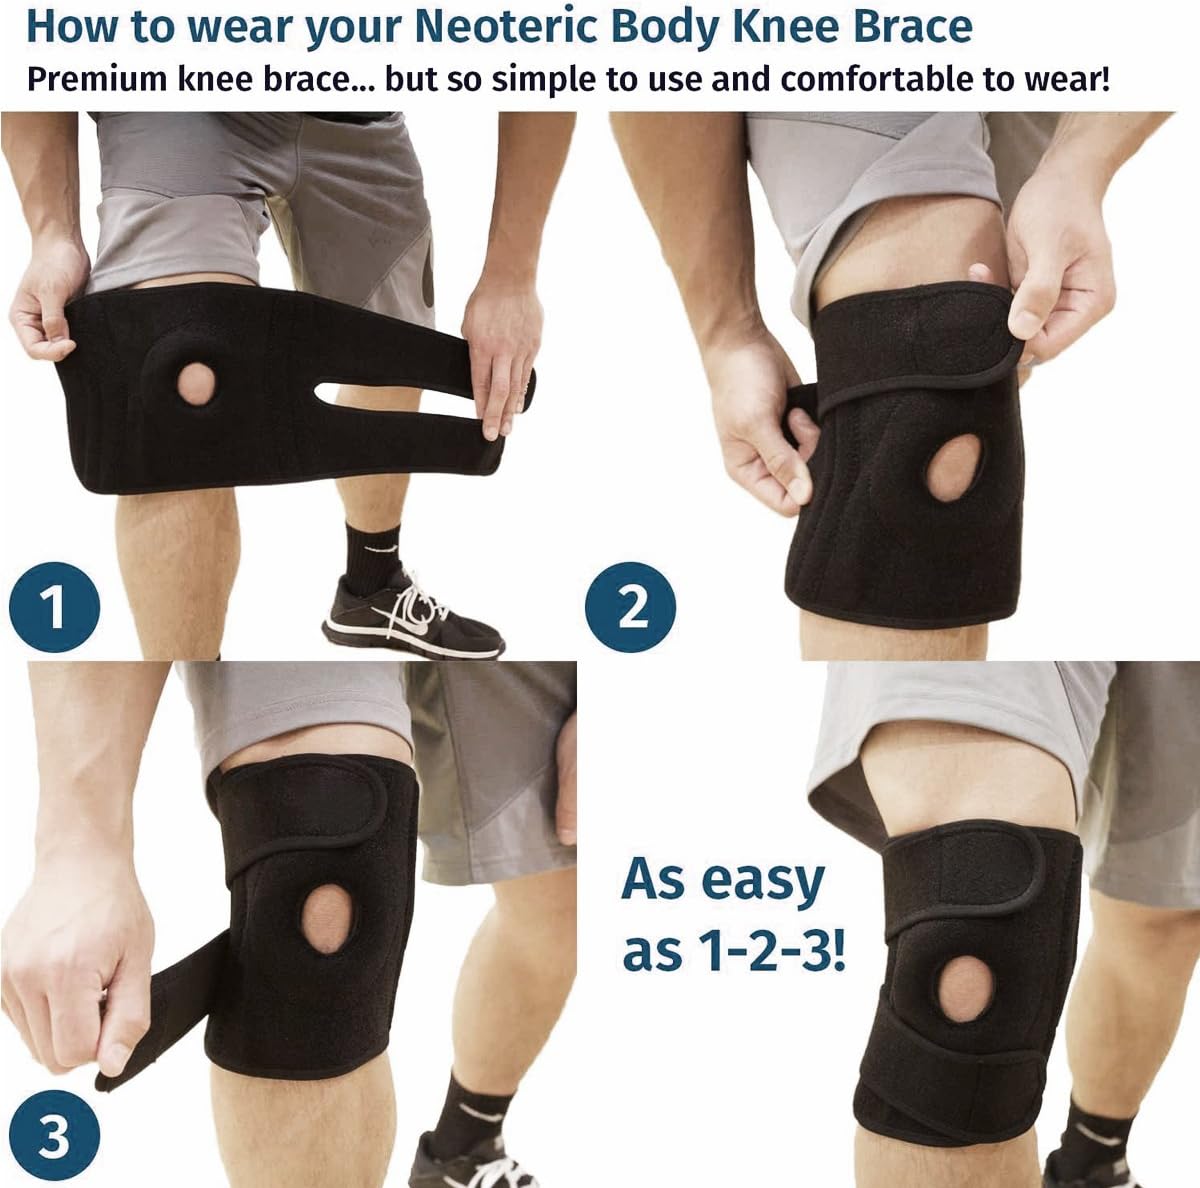 Beschoi Knee Brace - Breathable, Adjustable for ACL injuries